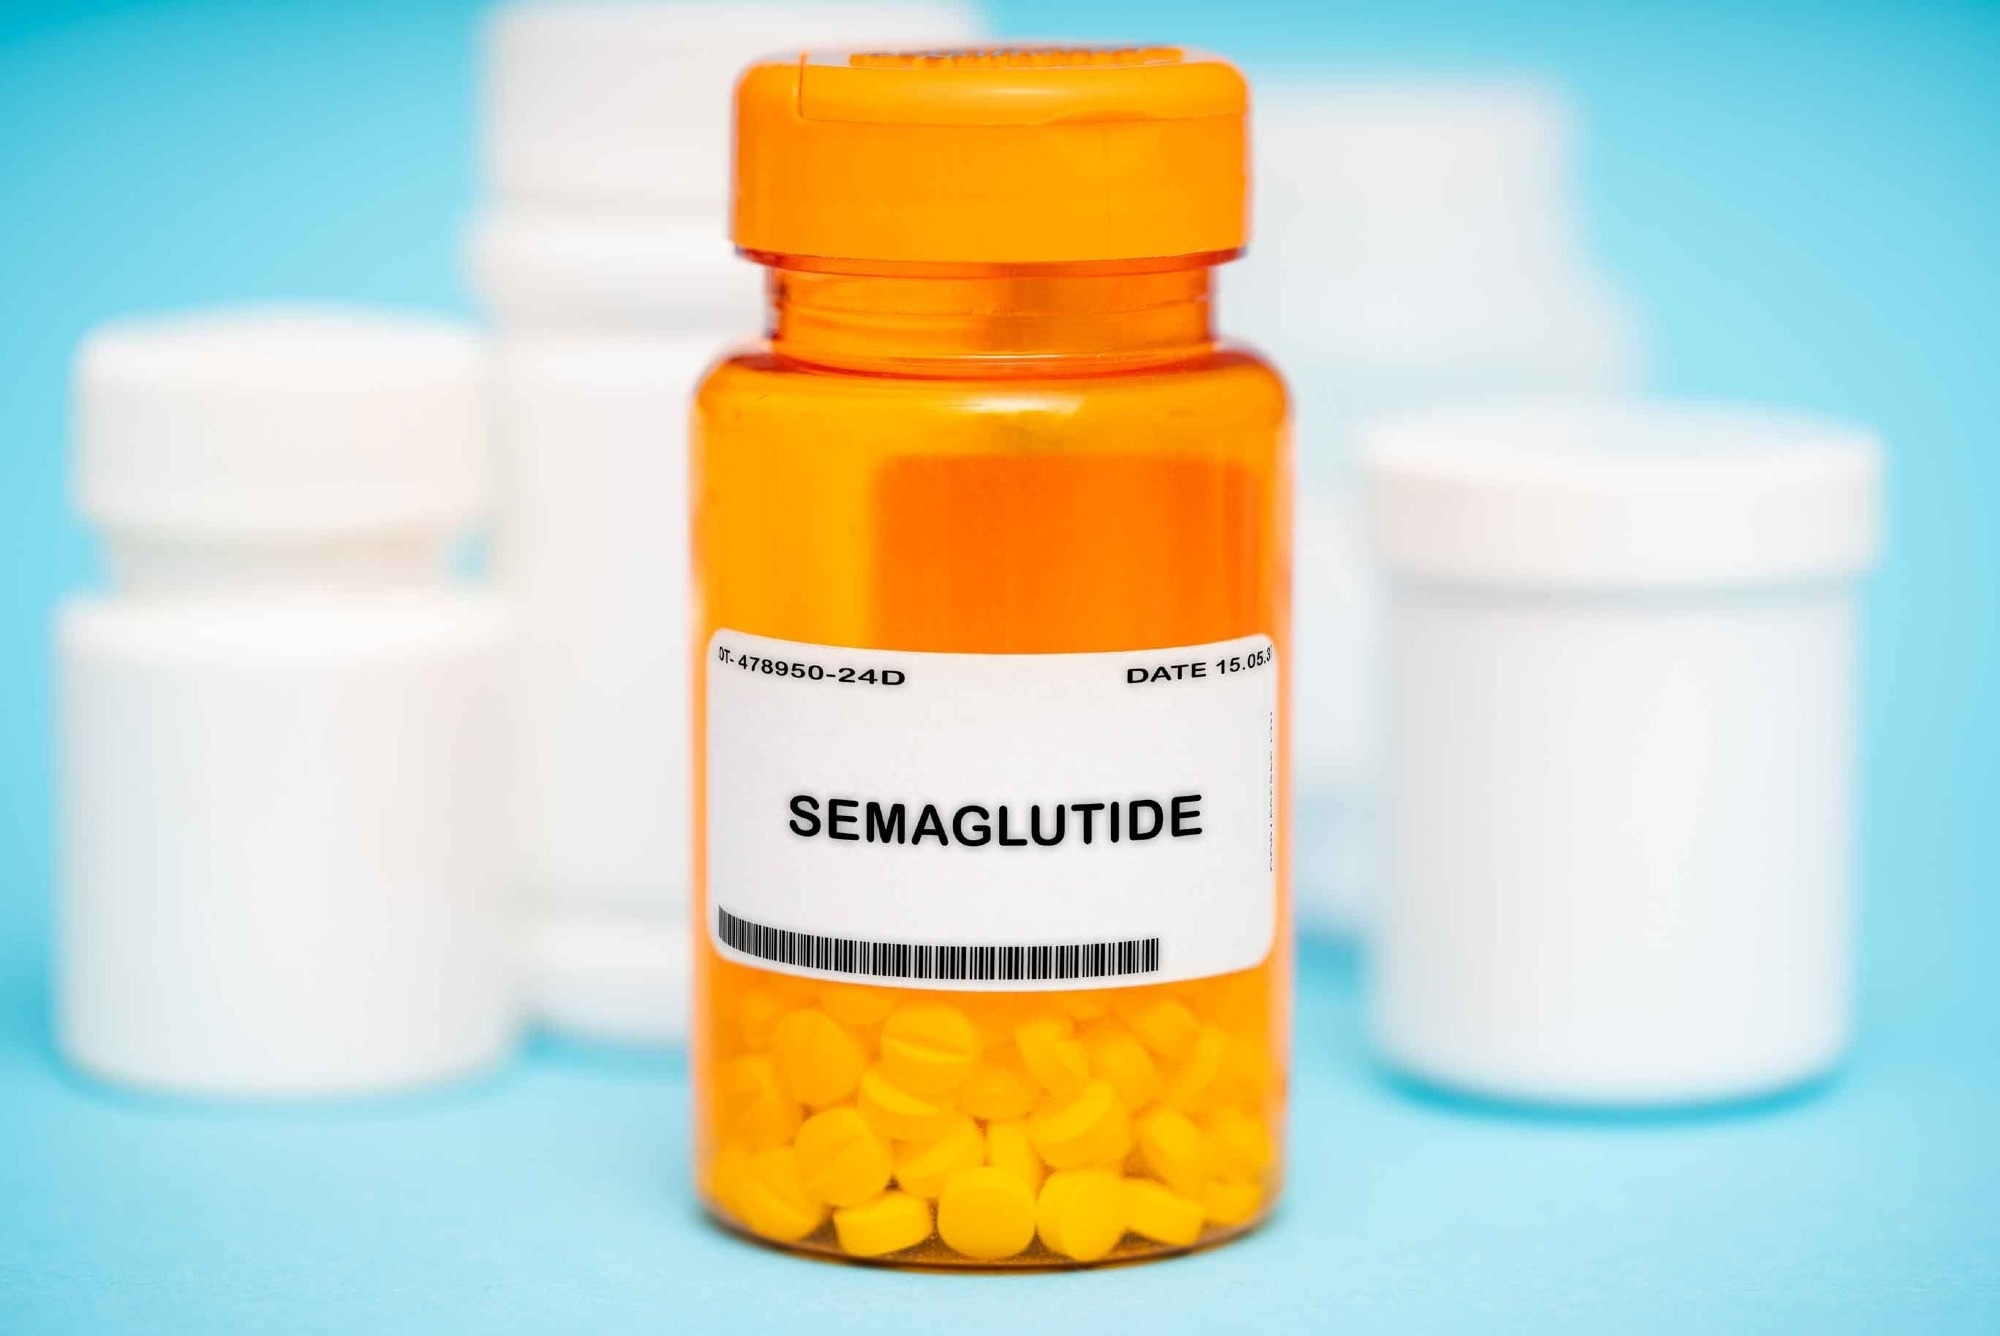 Study: Oral semaglutide 50 mg taken once per day in adults with overweight or obesity (OASIS 1): a randomised, double-blind, placebo-controlled, phase 3 trial. Image Credit: luchschenF/Shutterstock.com